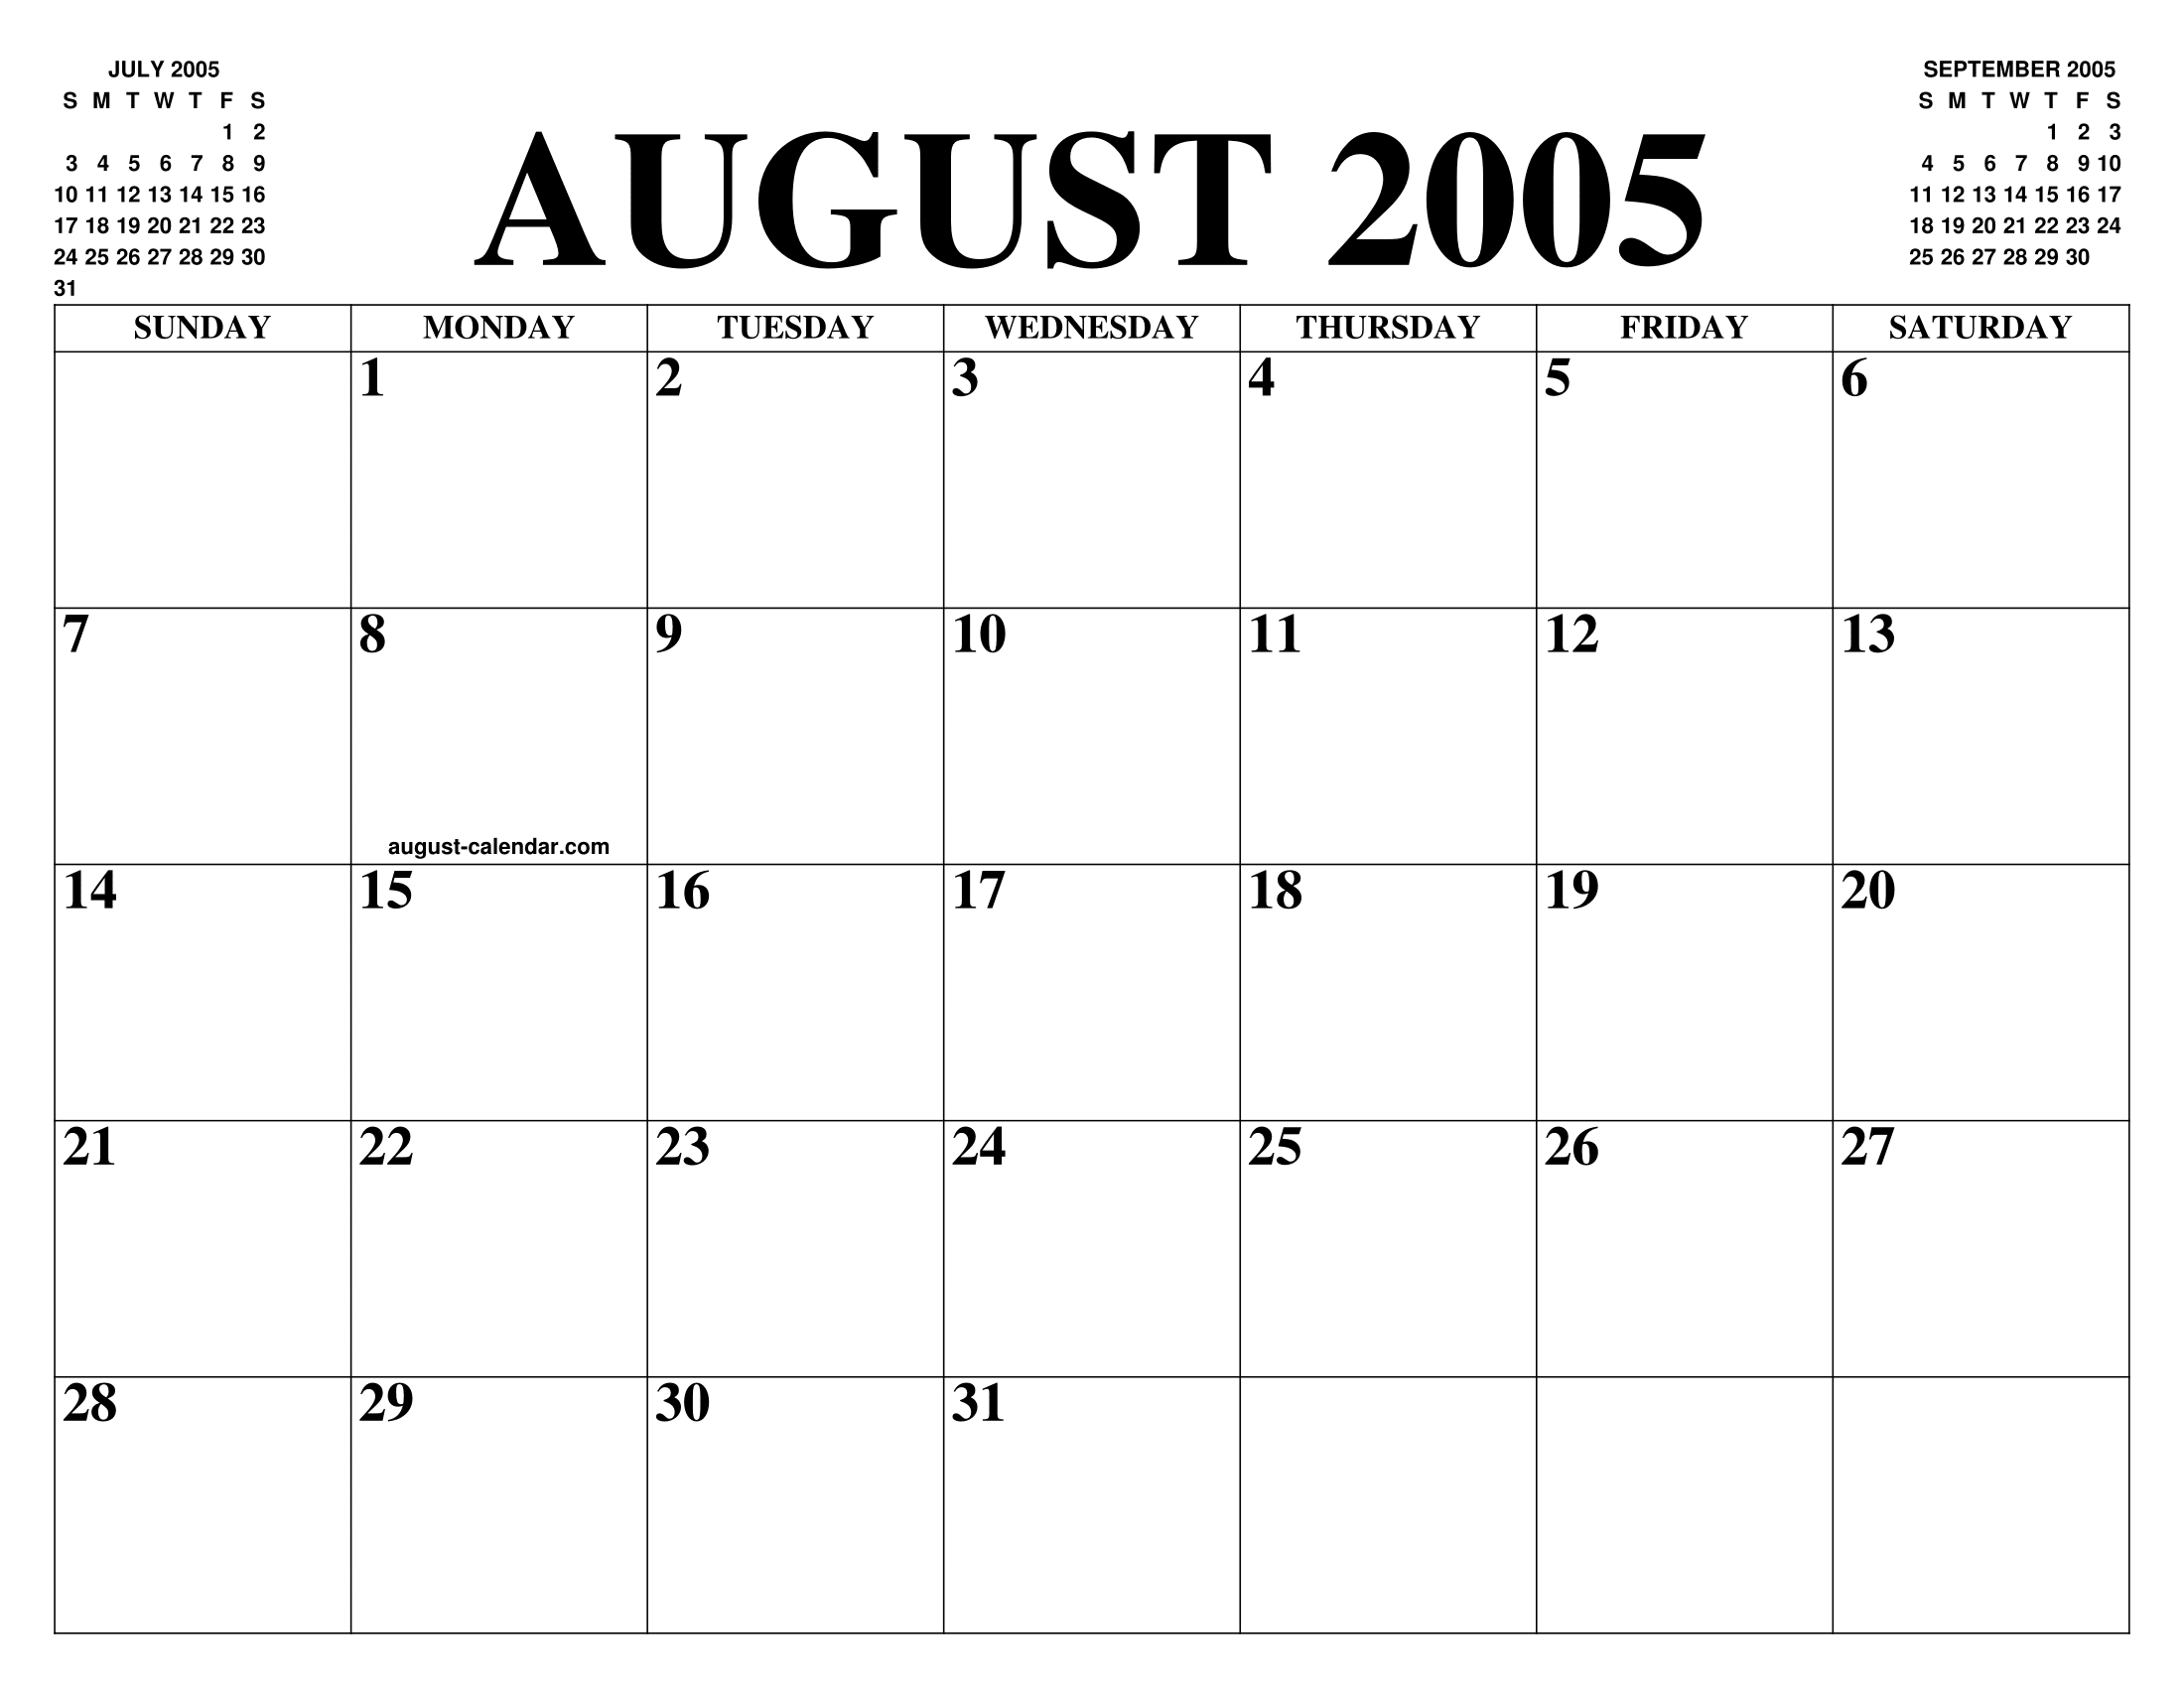 AUGUST 2005 CALENDAR OF THE MONTH: FREE PRINTABLE AUGUST CALENDAR OF